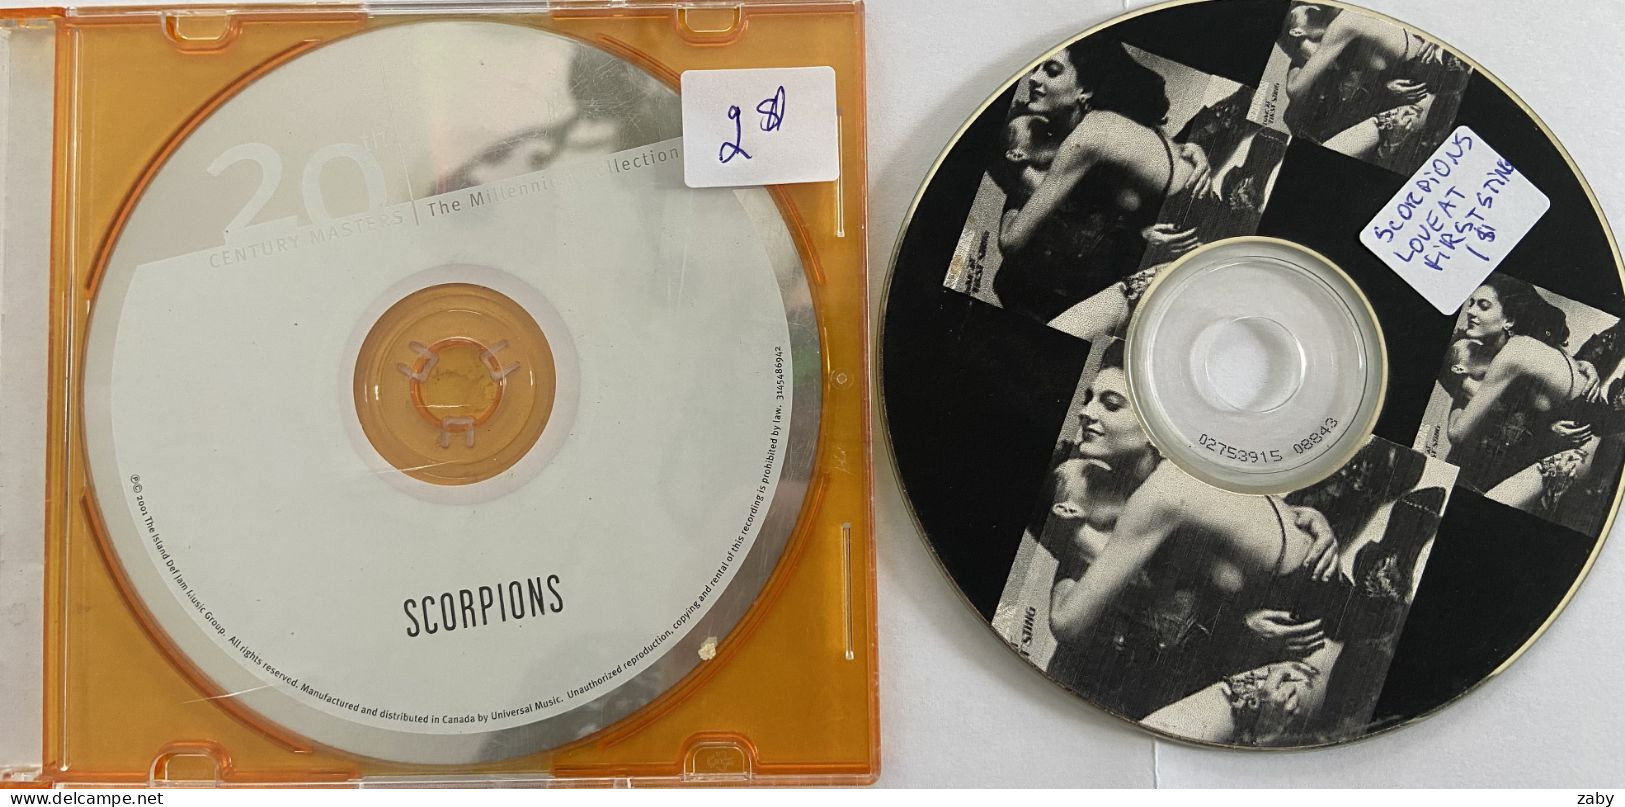 CDs de Scorpions//Fly to Rainbow + Blackout + Face the Heat + Love at first Sting + compilation